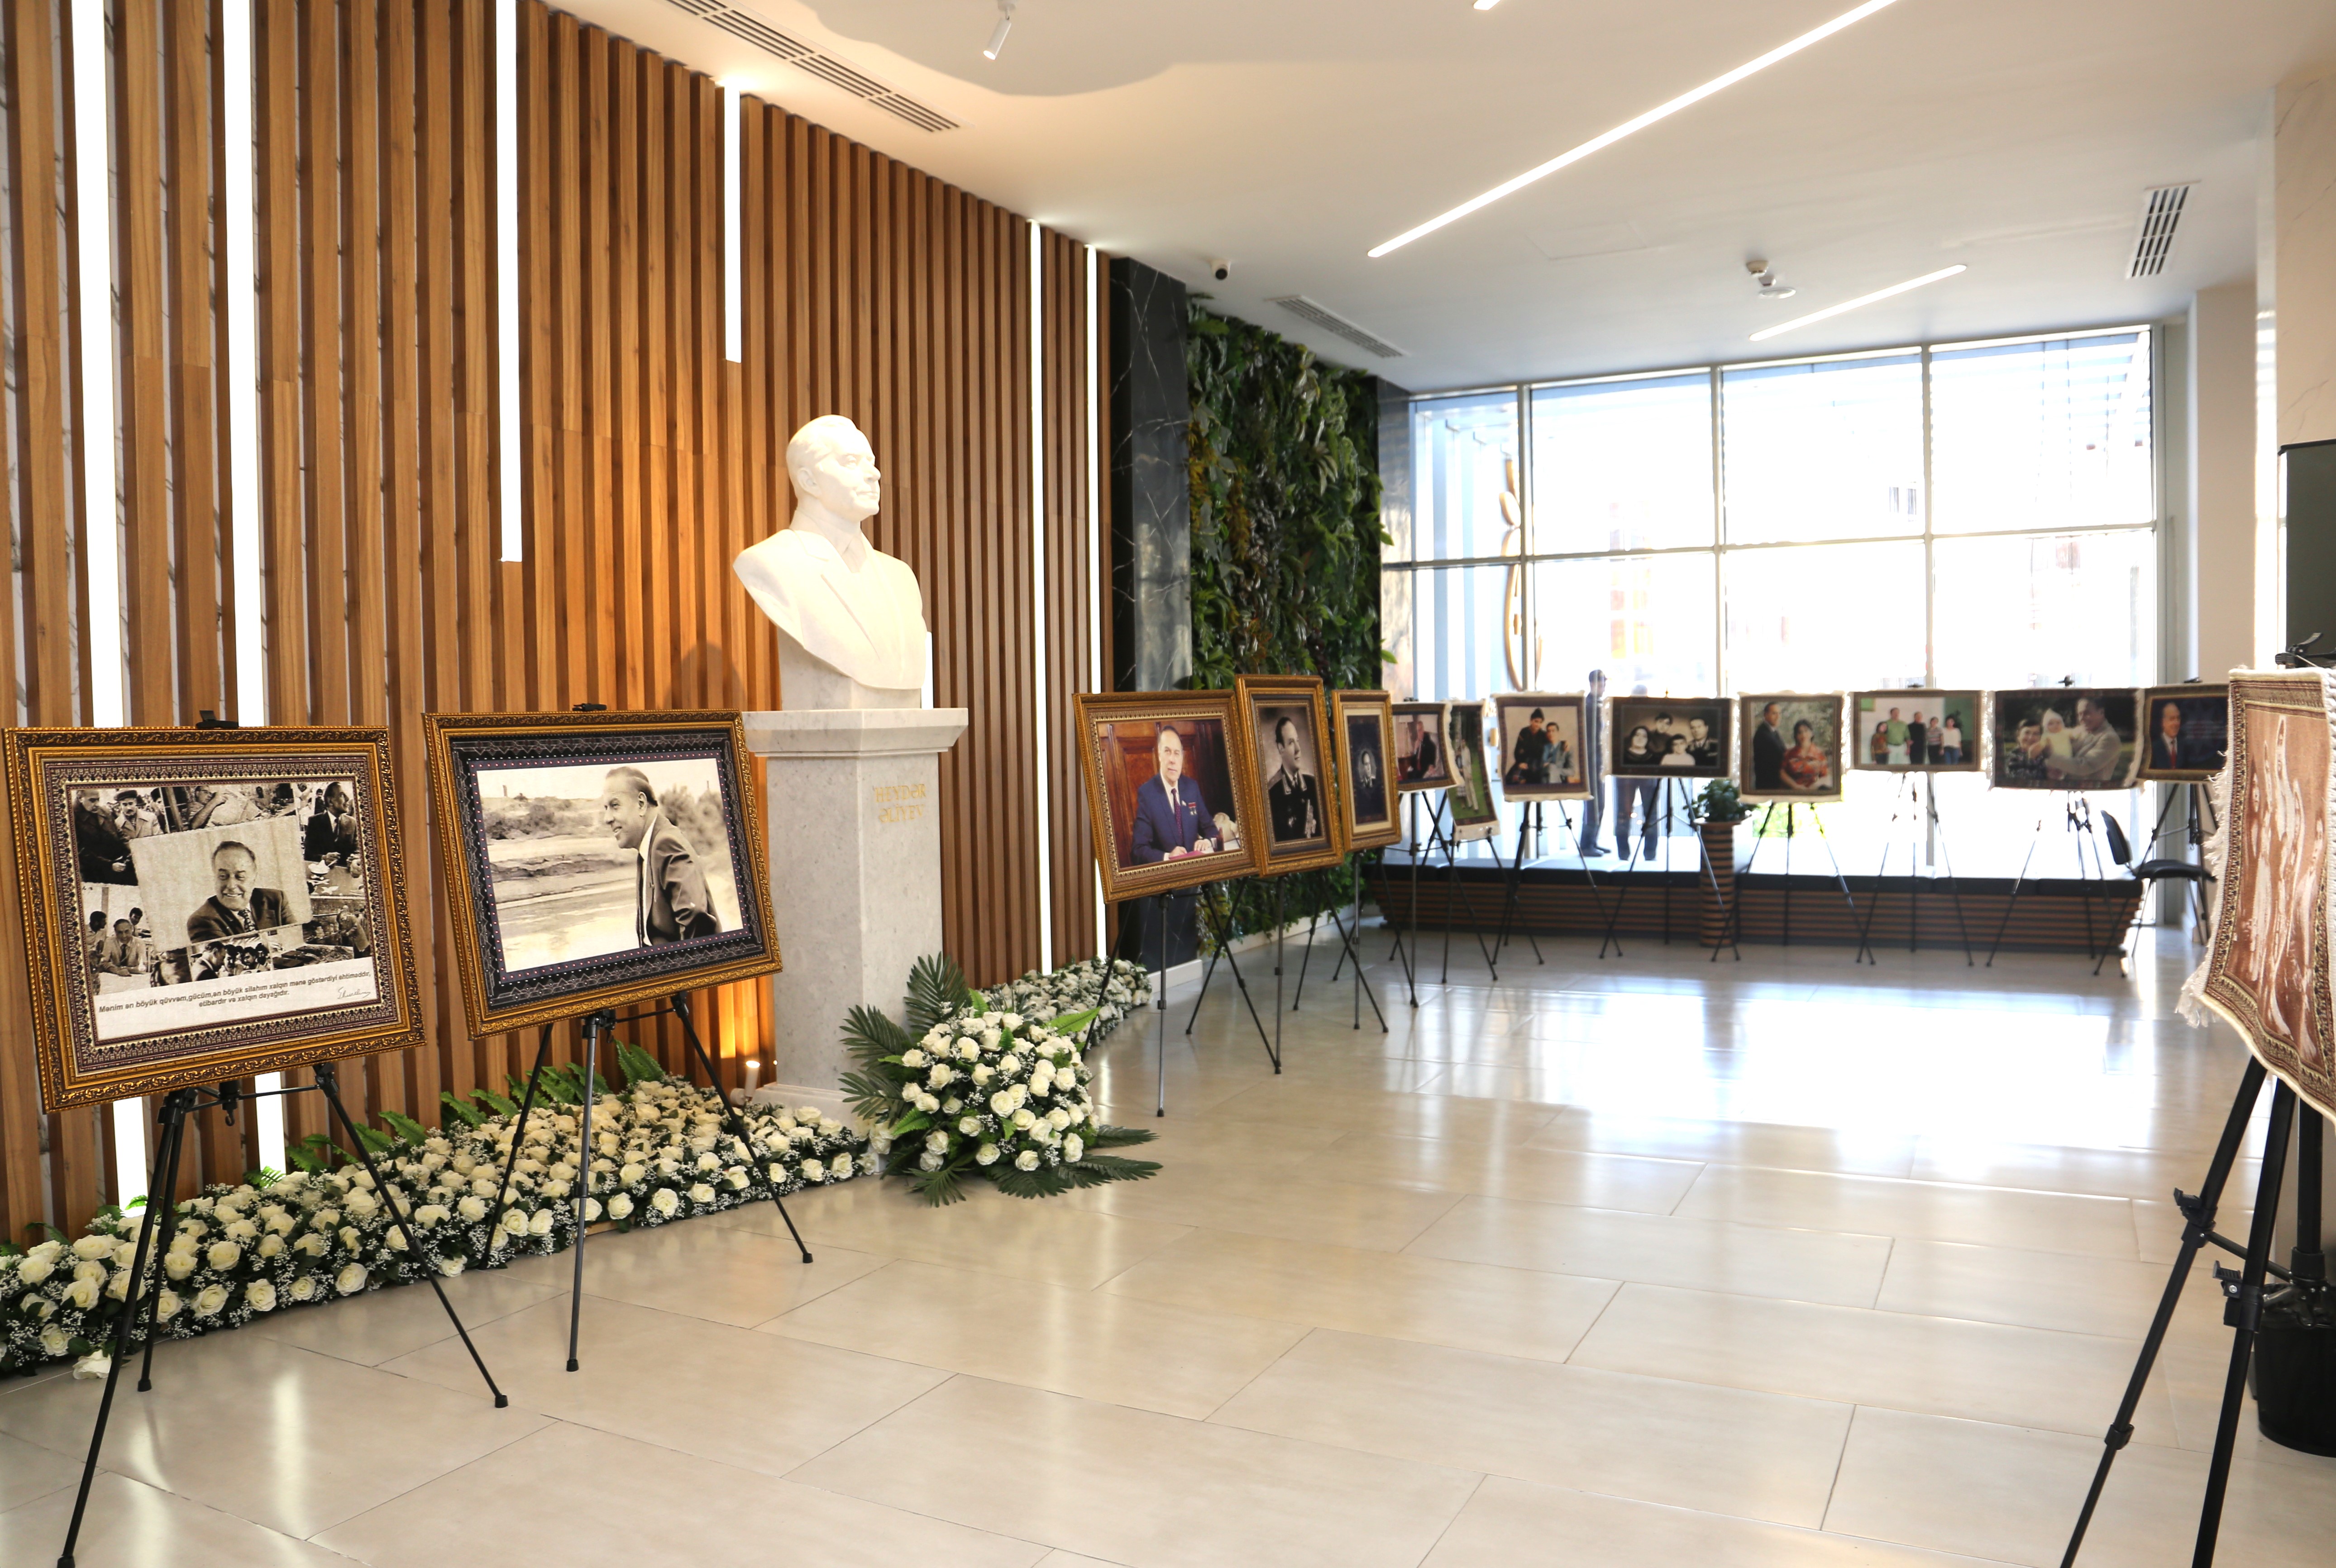 The photo exhibition "Heydar Aliyev: An Unforgettable Leader" was hosted at the Baku SMB House 